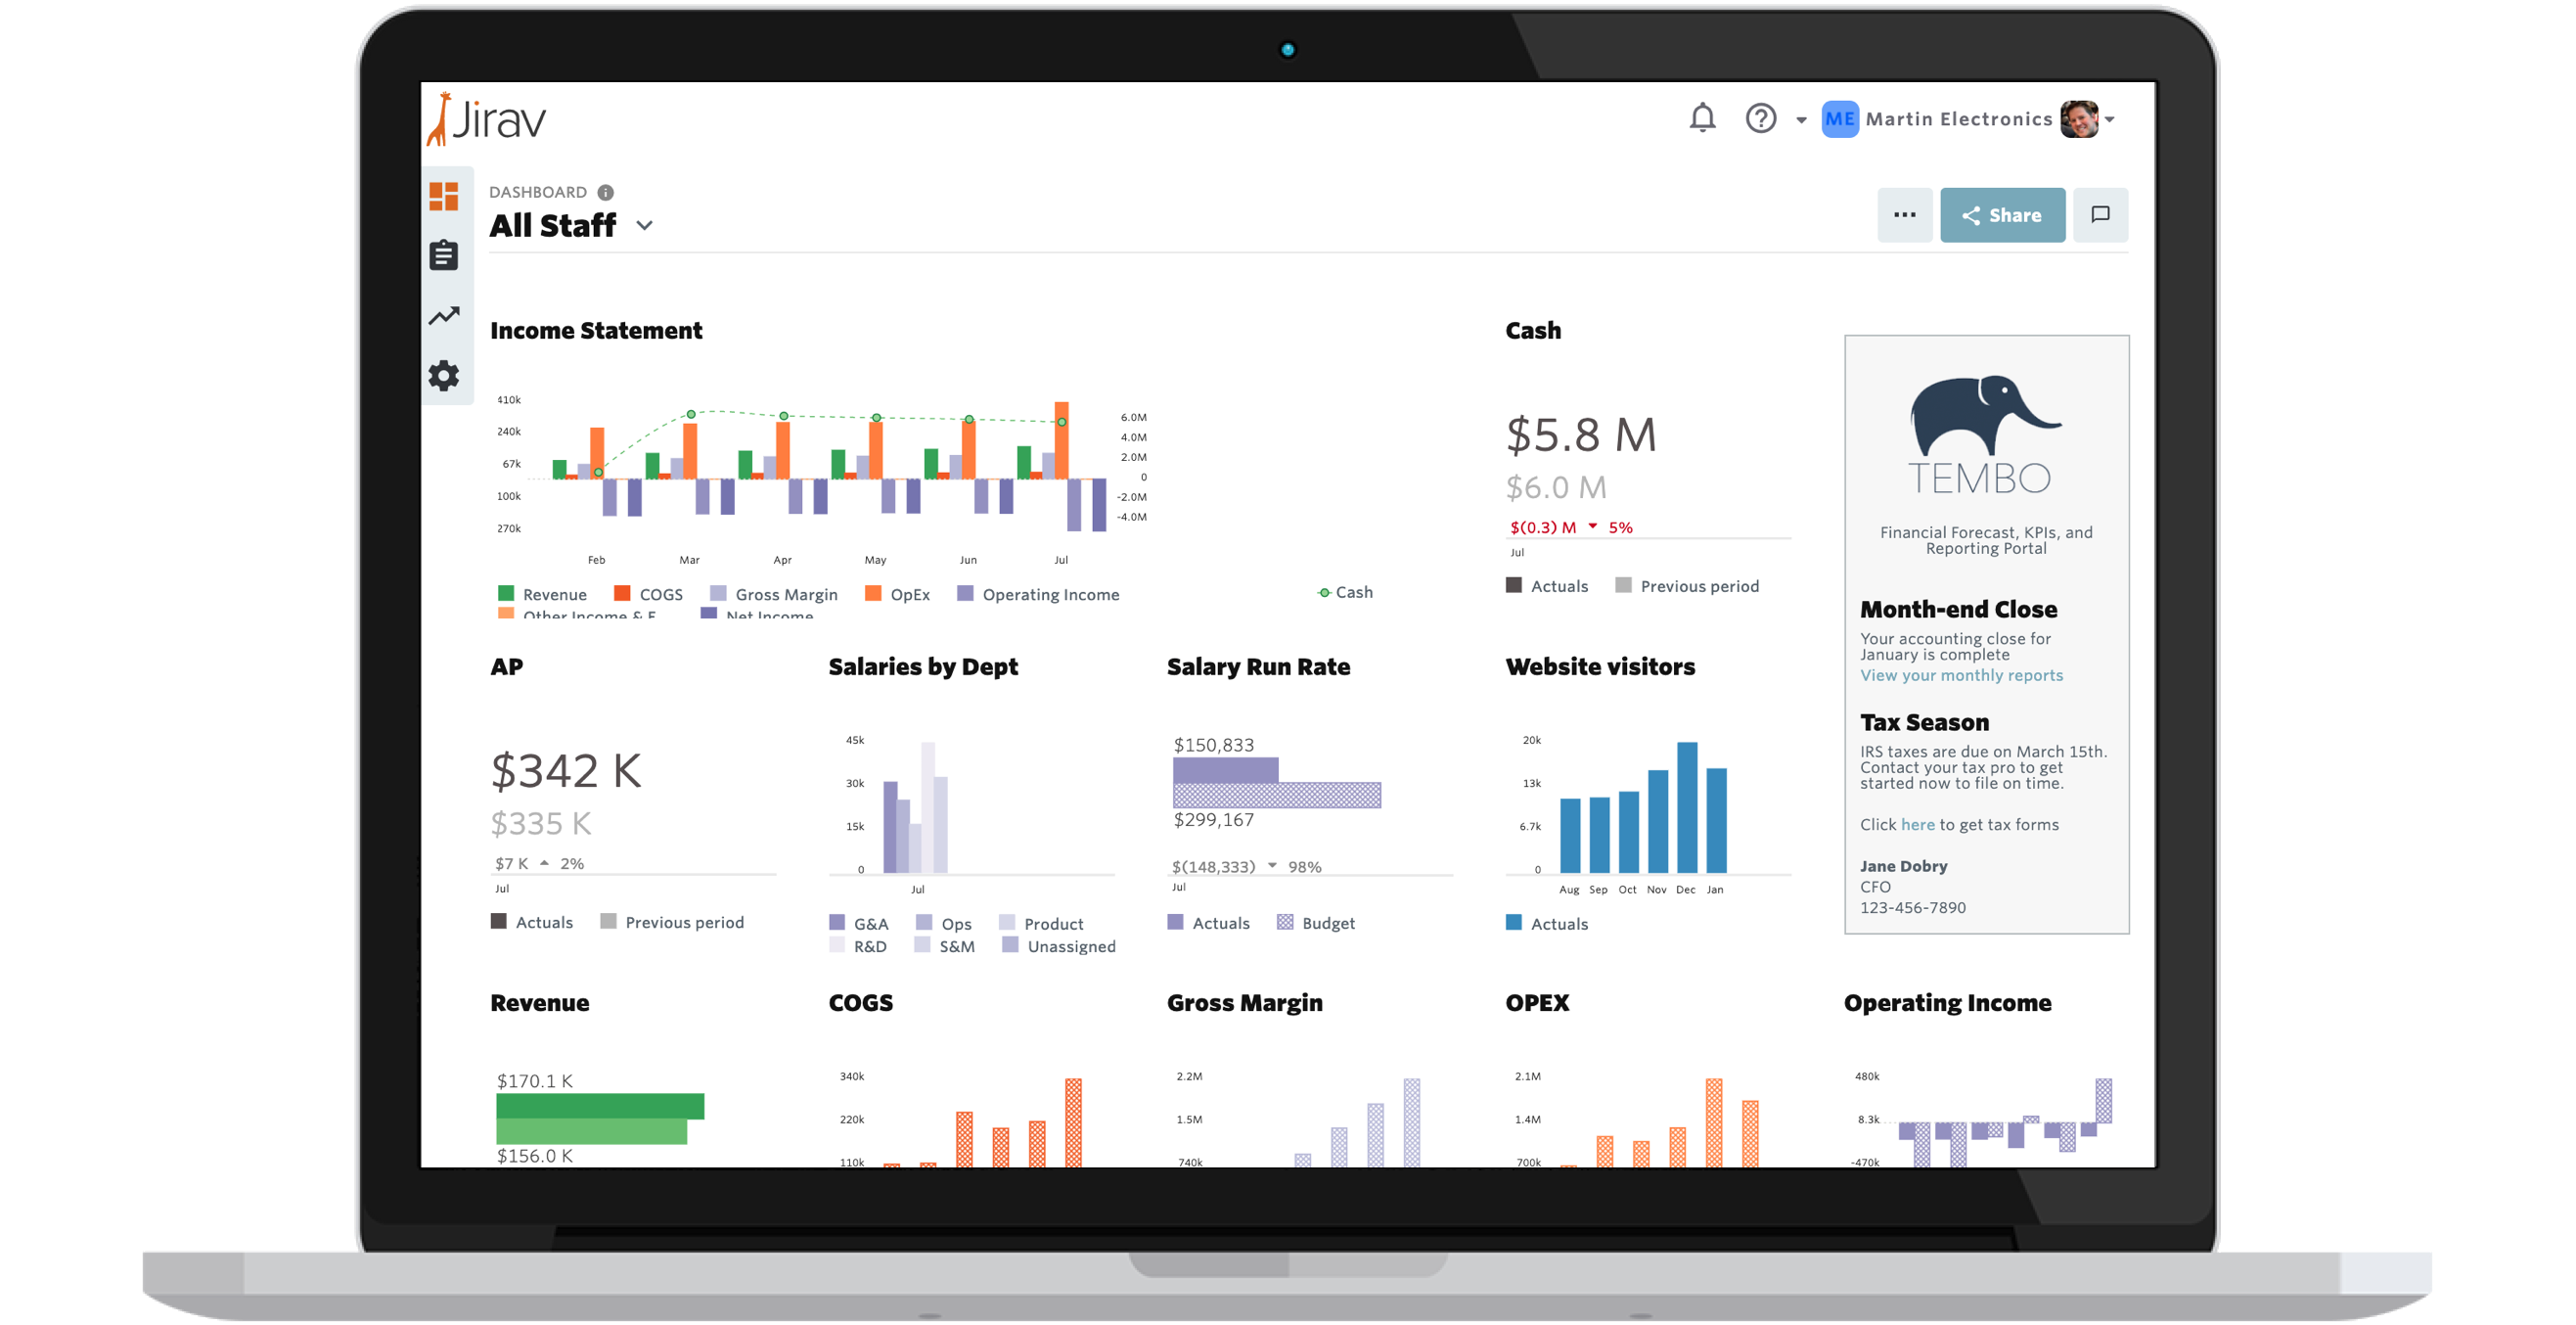 Screenshot of Jirav's customizable business dashboard, which allows startup founders to communicate both financial and operational data to all key stakeholders